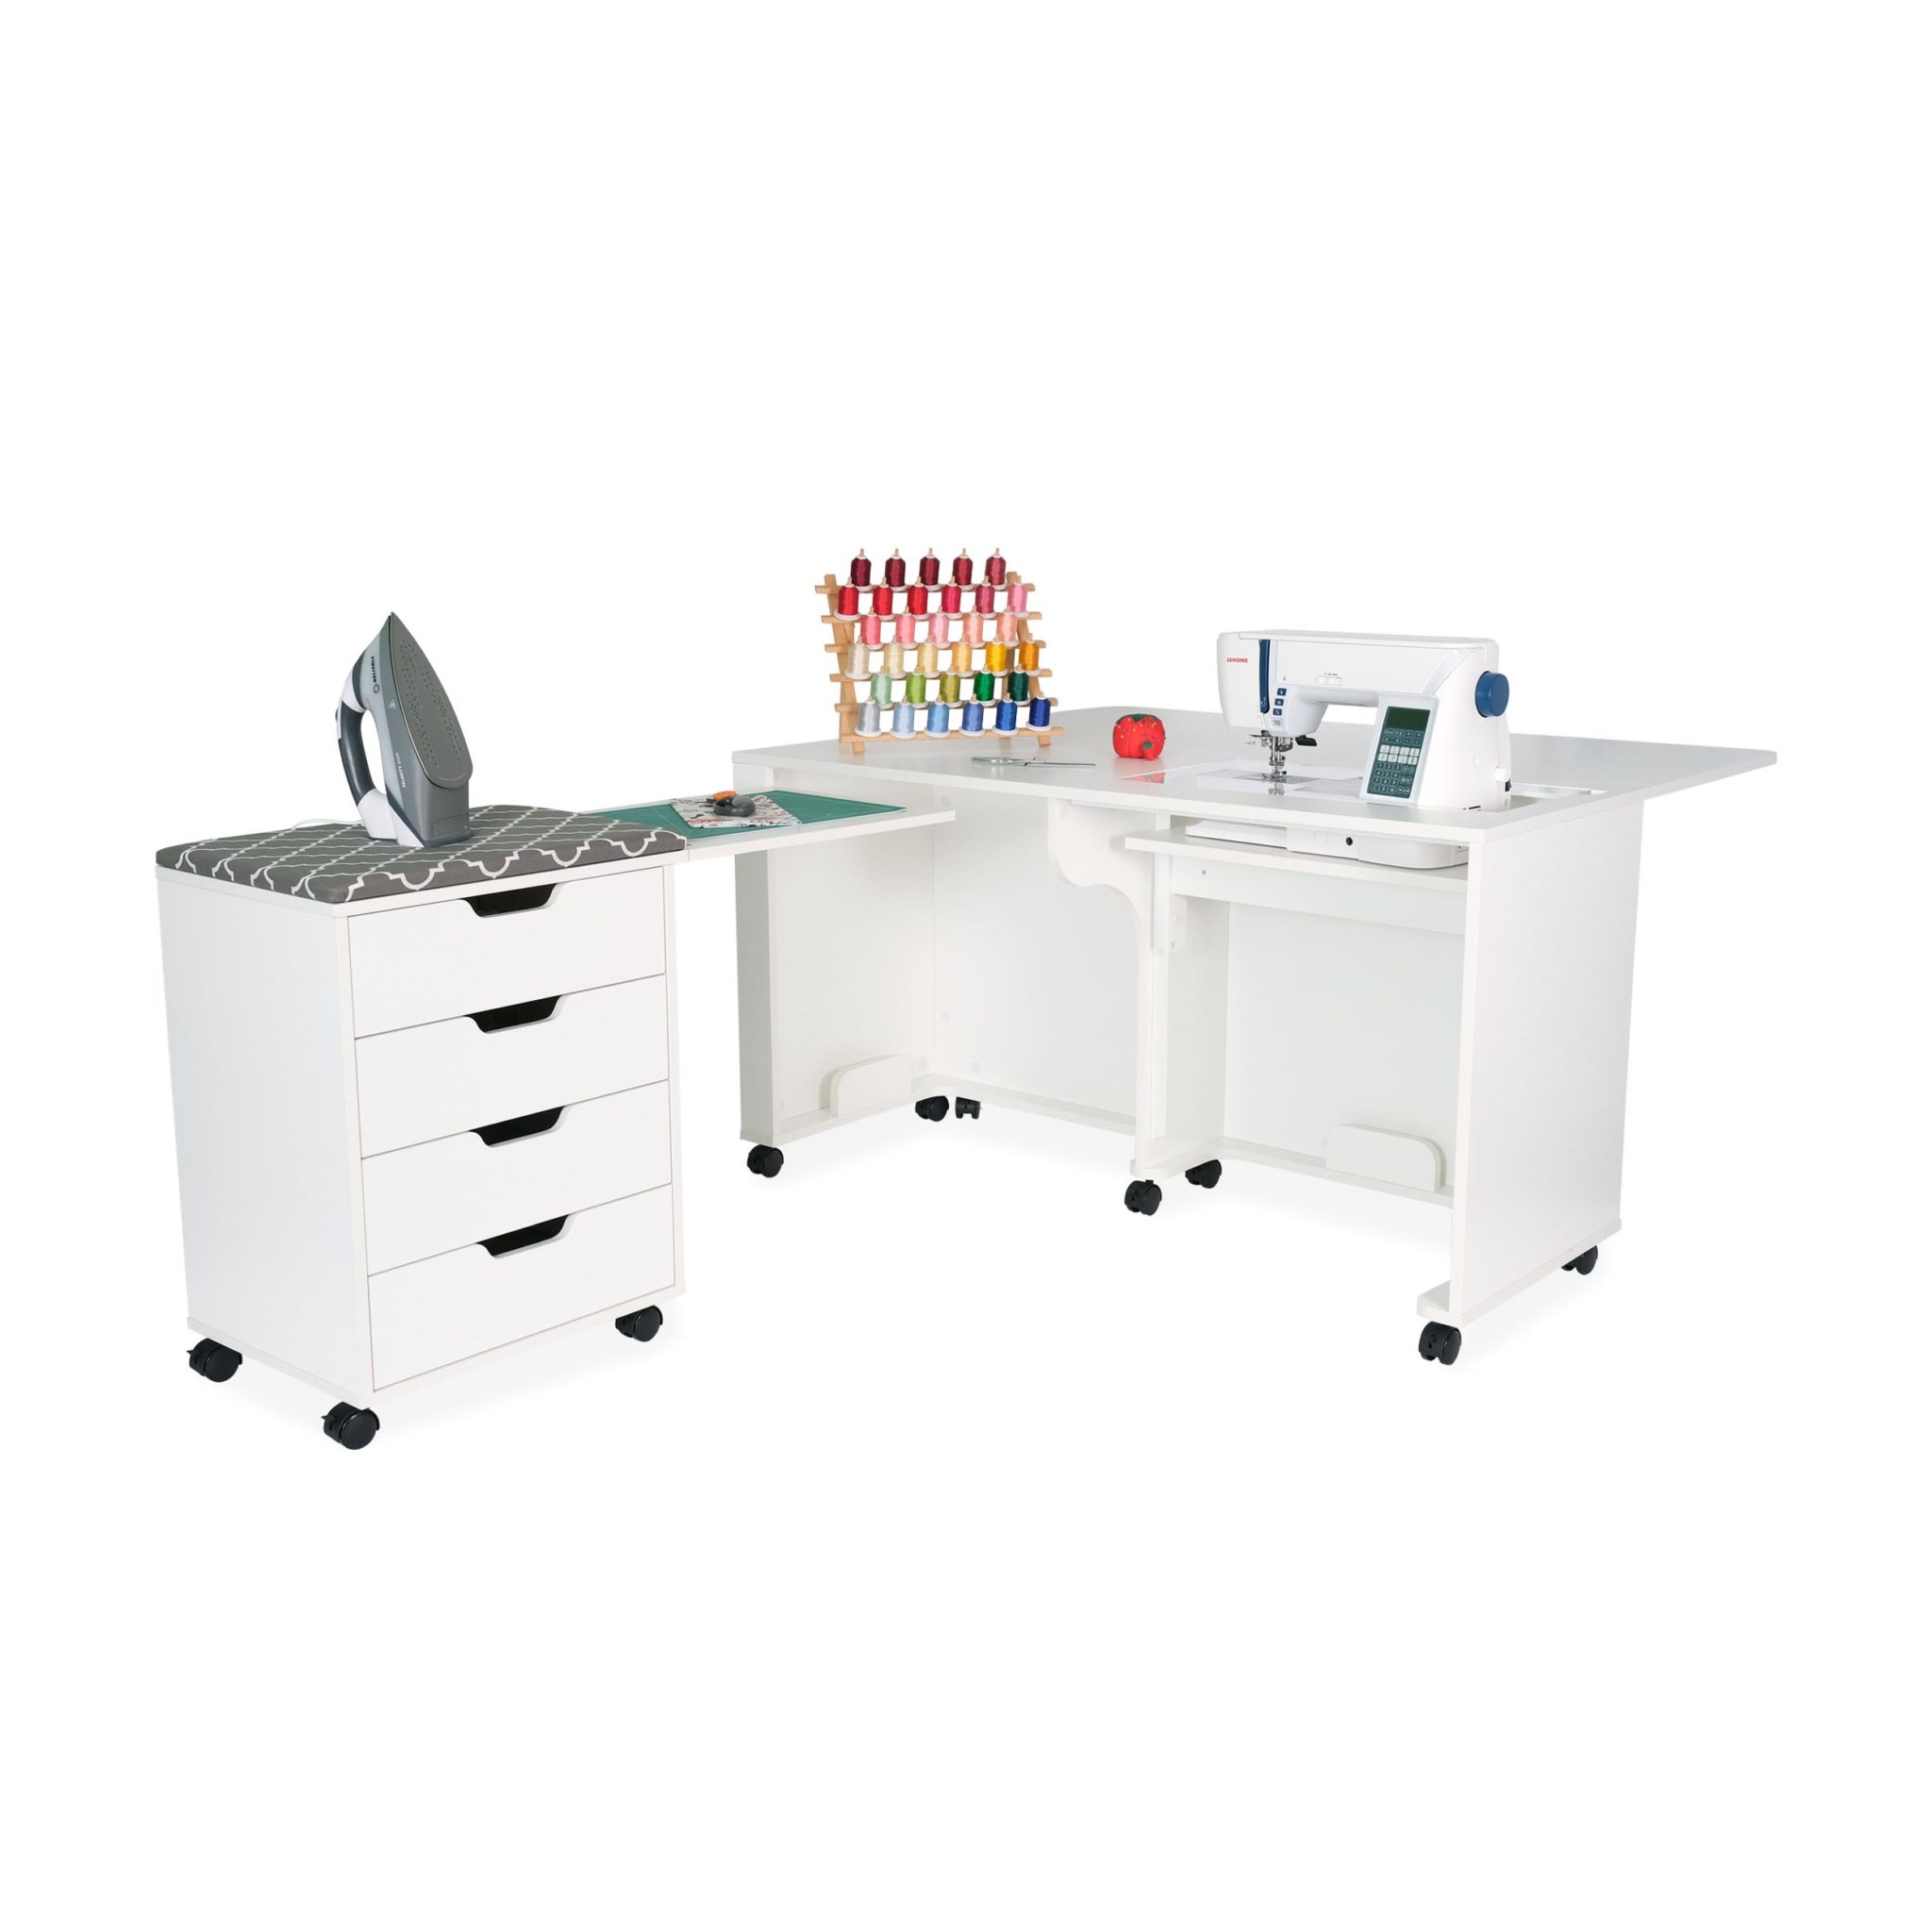 MOD SEWING CABINET